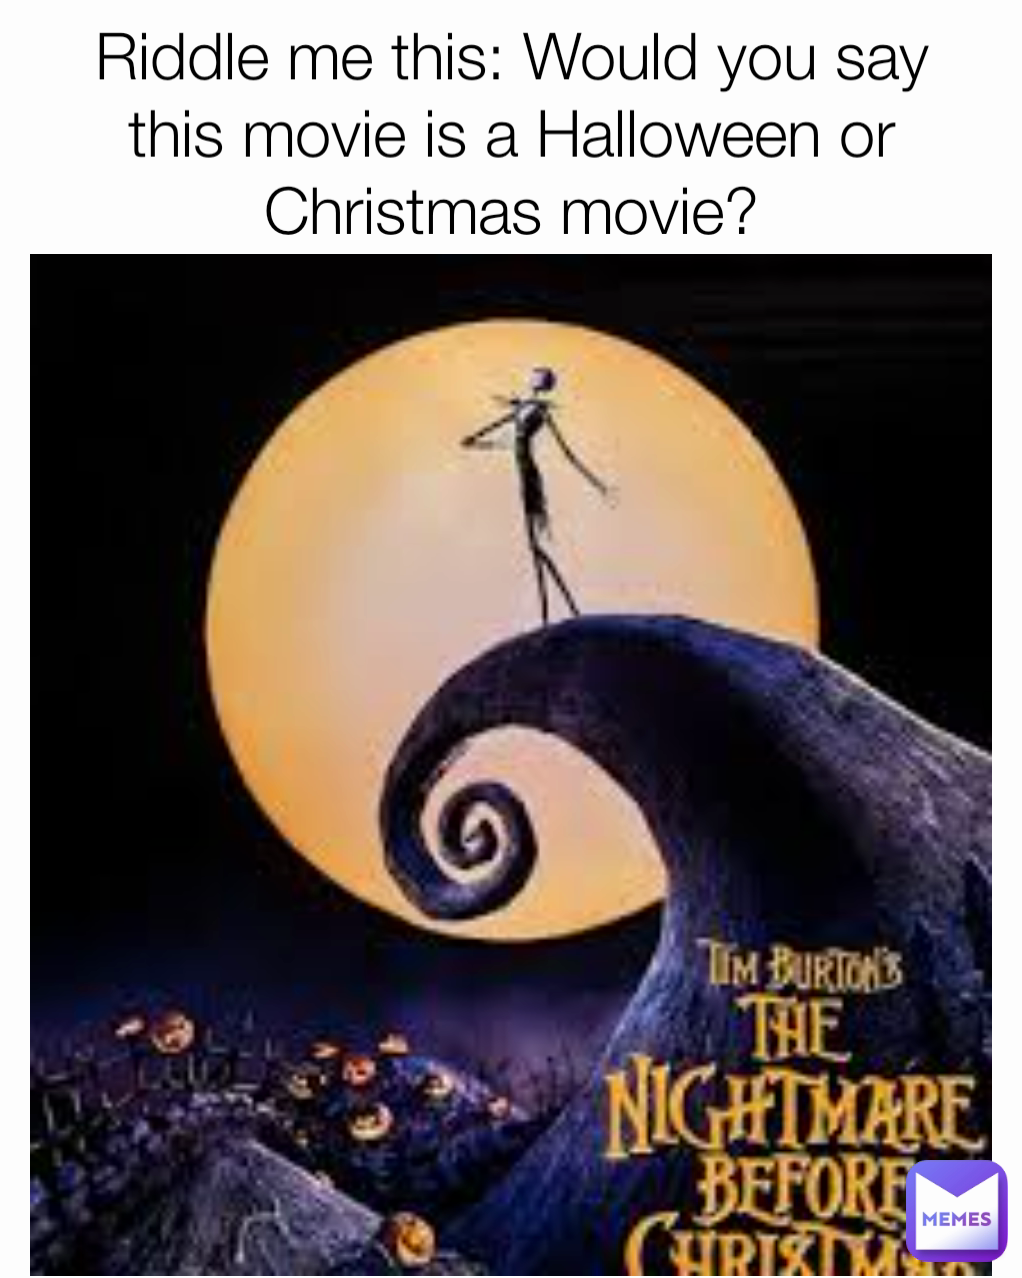 Riddle me this: Would you say this movie is a Halloween or Christmas movie?